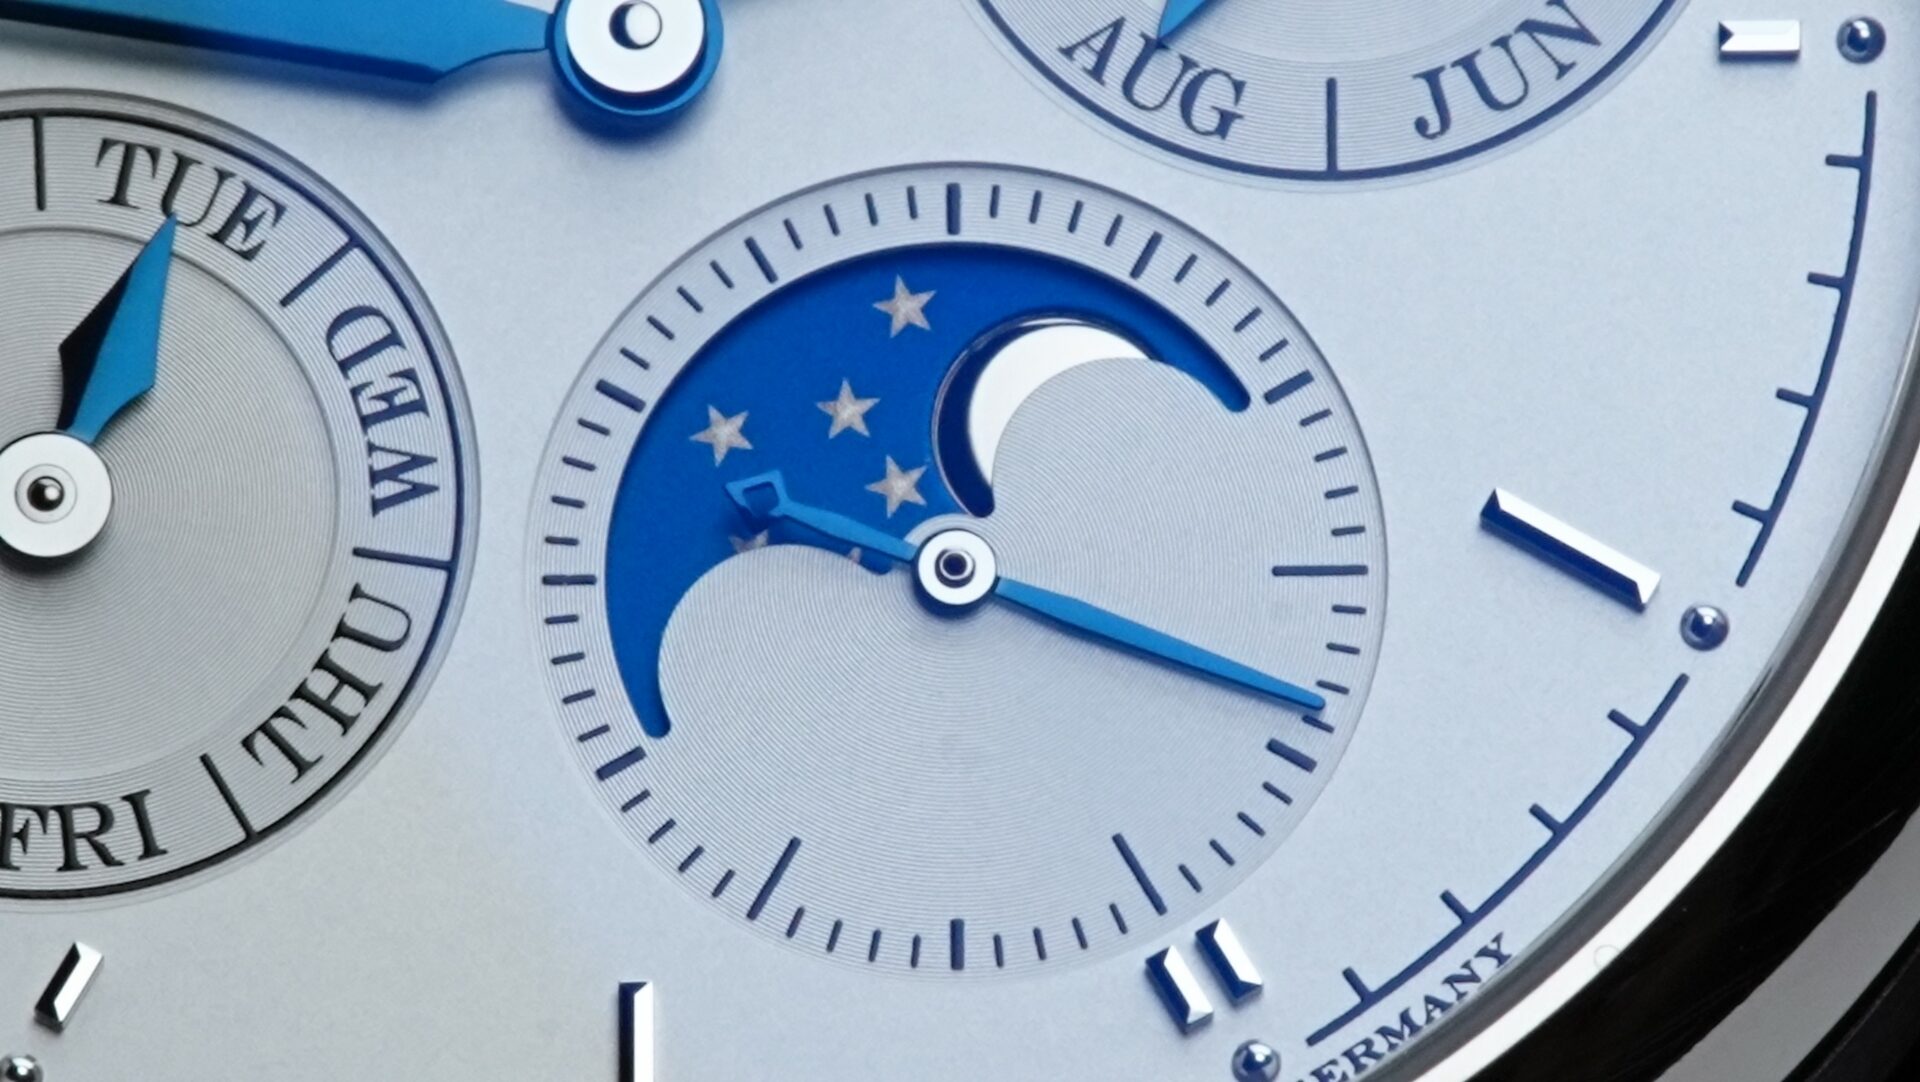 Zoomed in image of the moonphase on the dial of the A. Lange & Söhne Saxonia Annual Calendar watch.